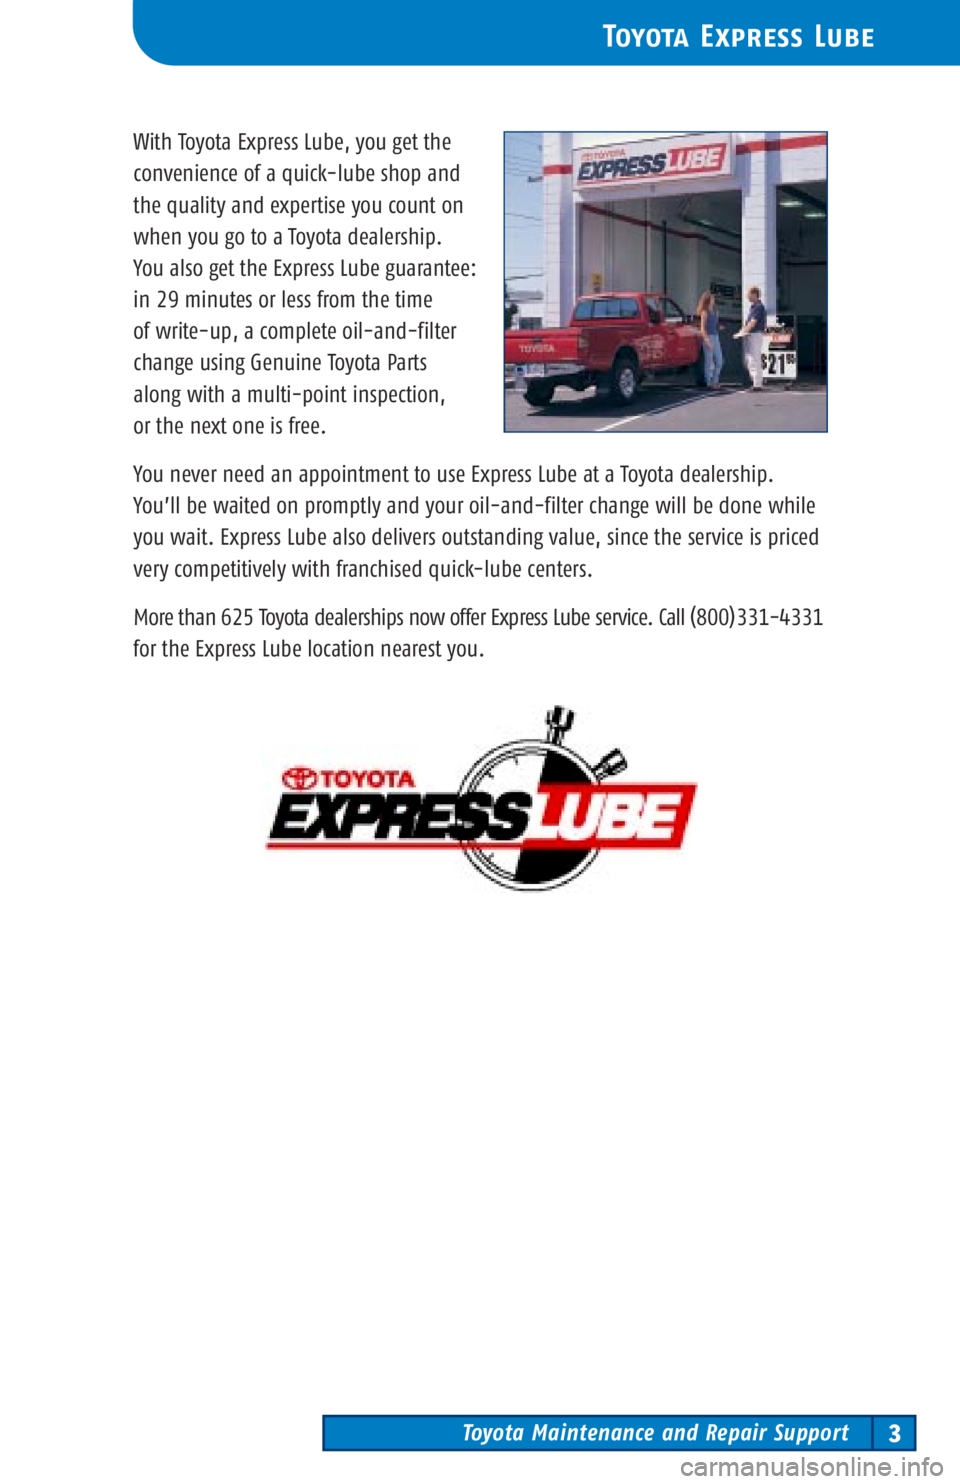 TOYOTA TACOMA 2002  Warranties & Maintenance Guides (in English) Toyota Maintenance and Repair Support3
Toyota Express Lube
With Toyota Express Lube, you get the
convenience of a quick-lube shop and 
the quality and expertise you count on
when you go to a Toyota de